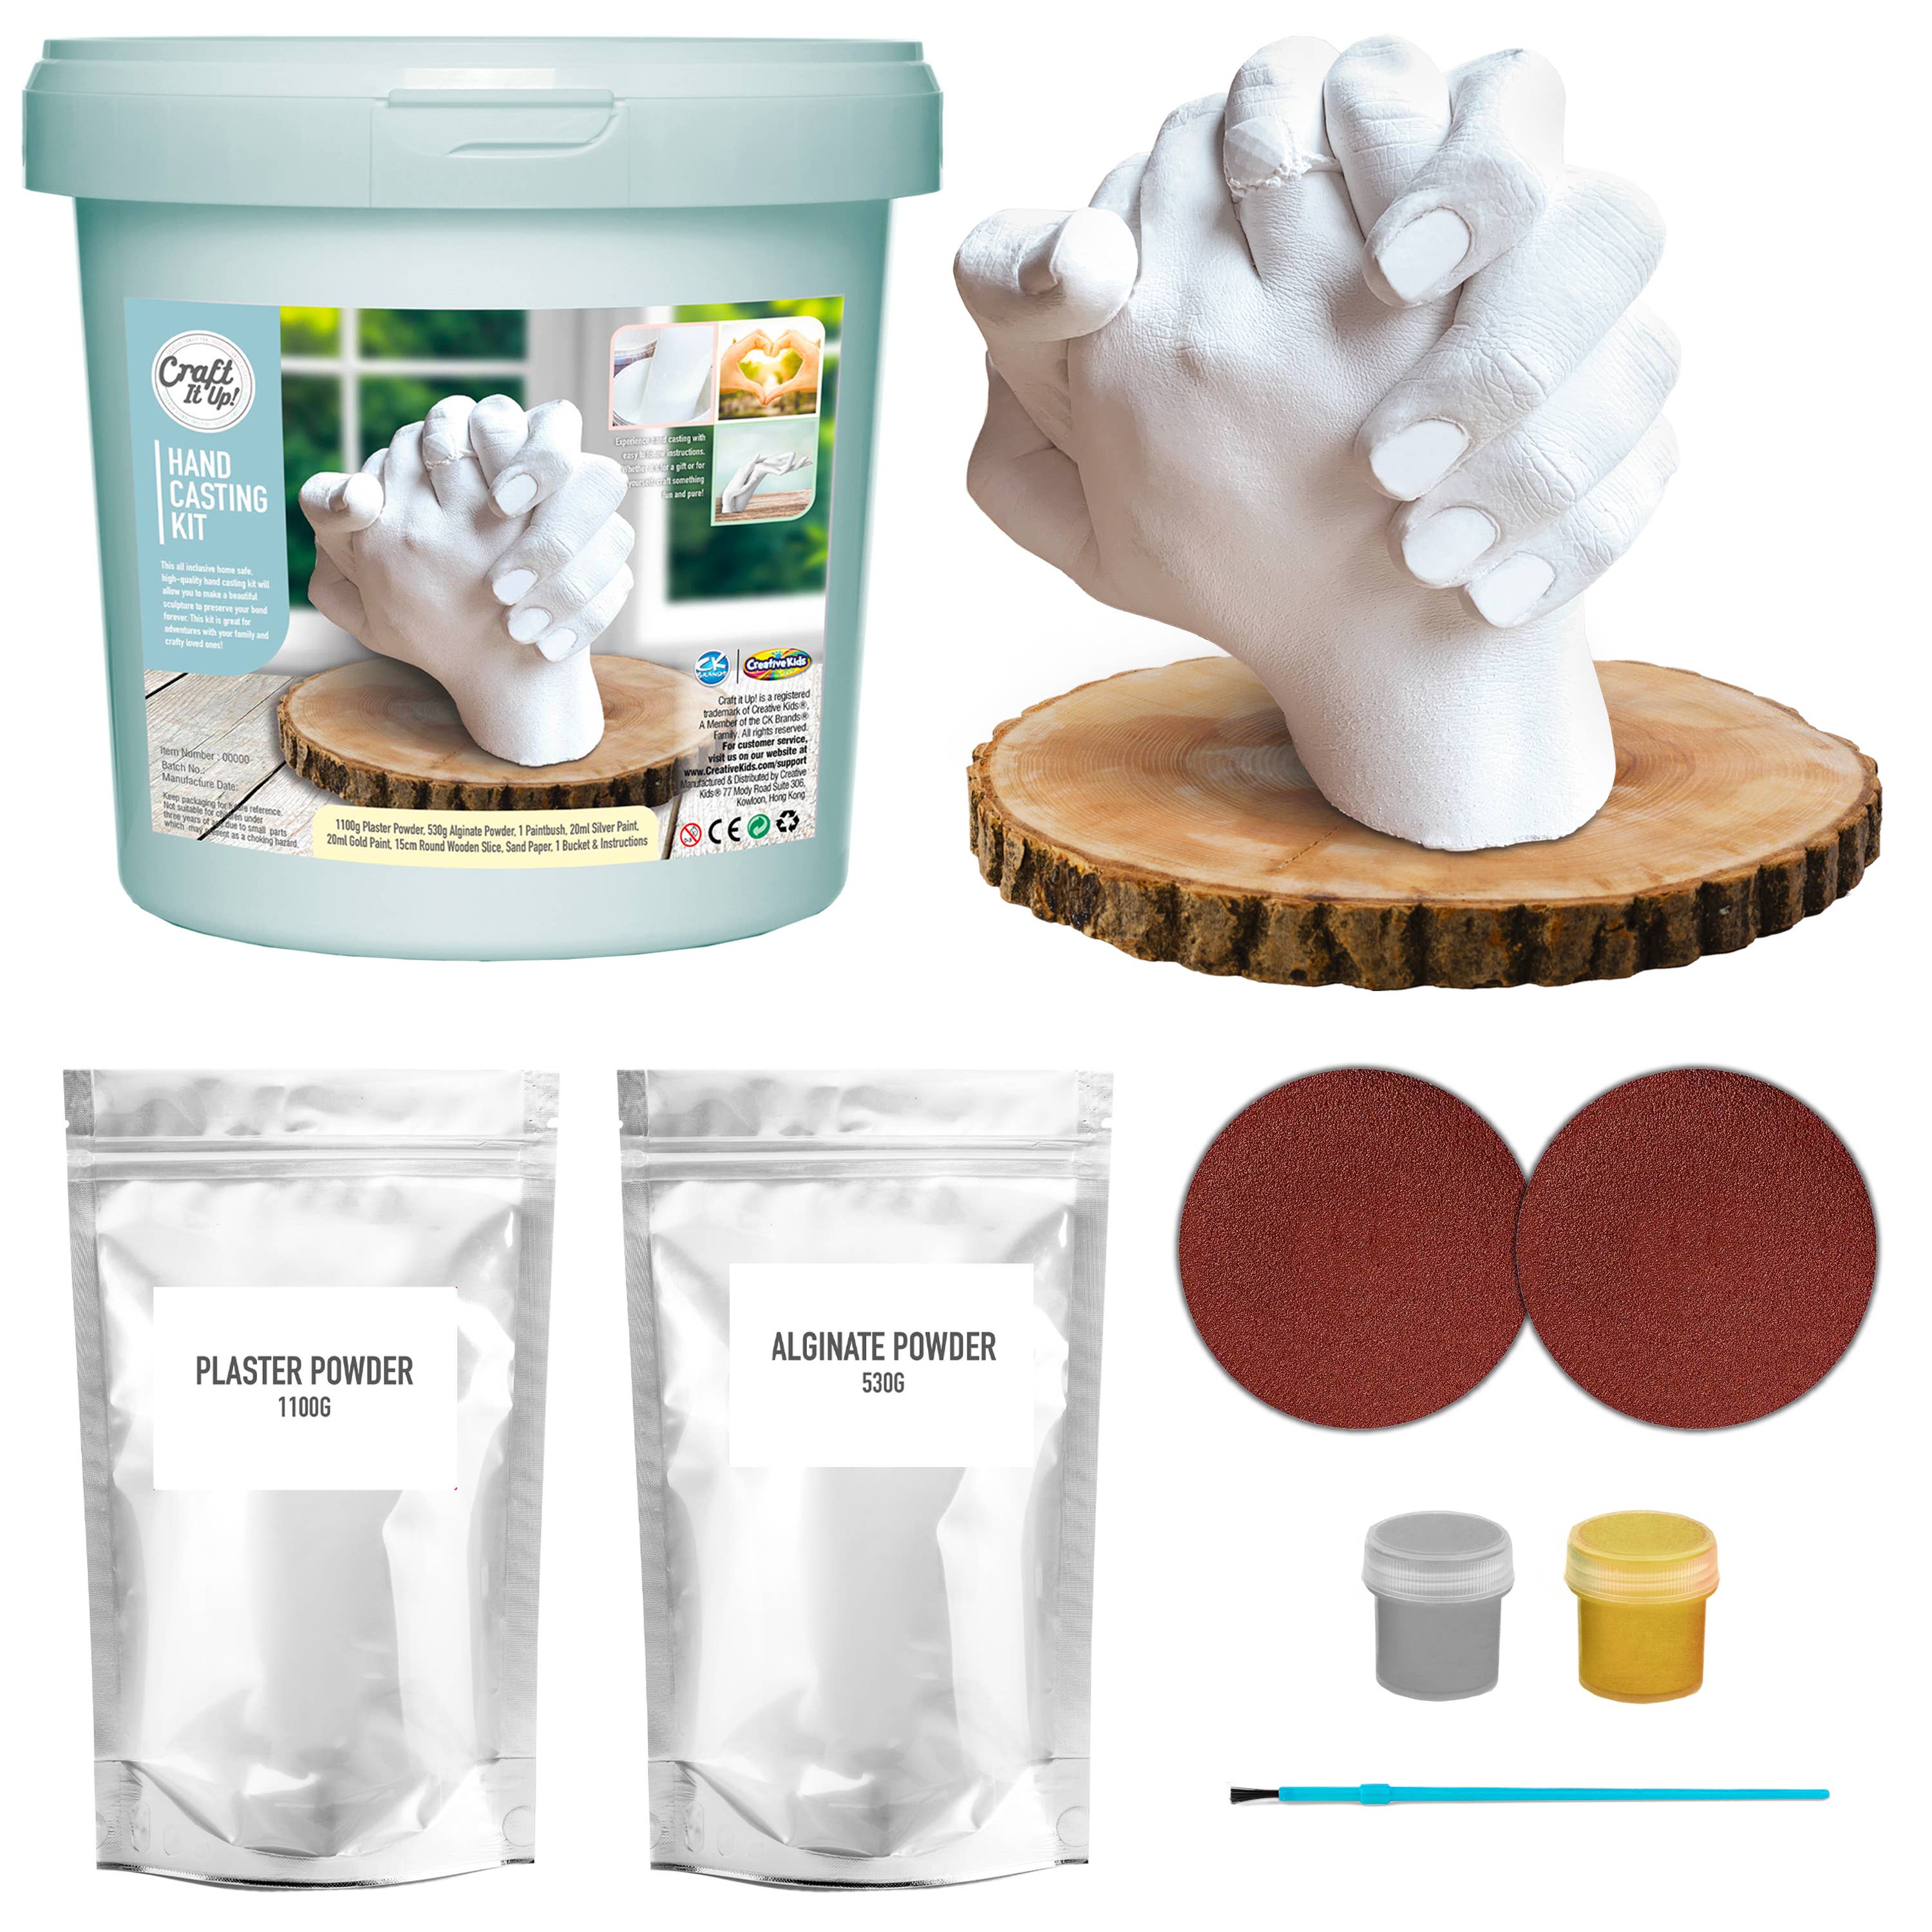 Complete Hand Casting Kit for Couples, for Her